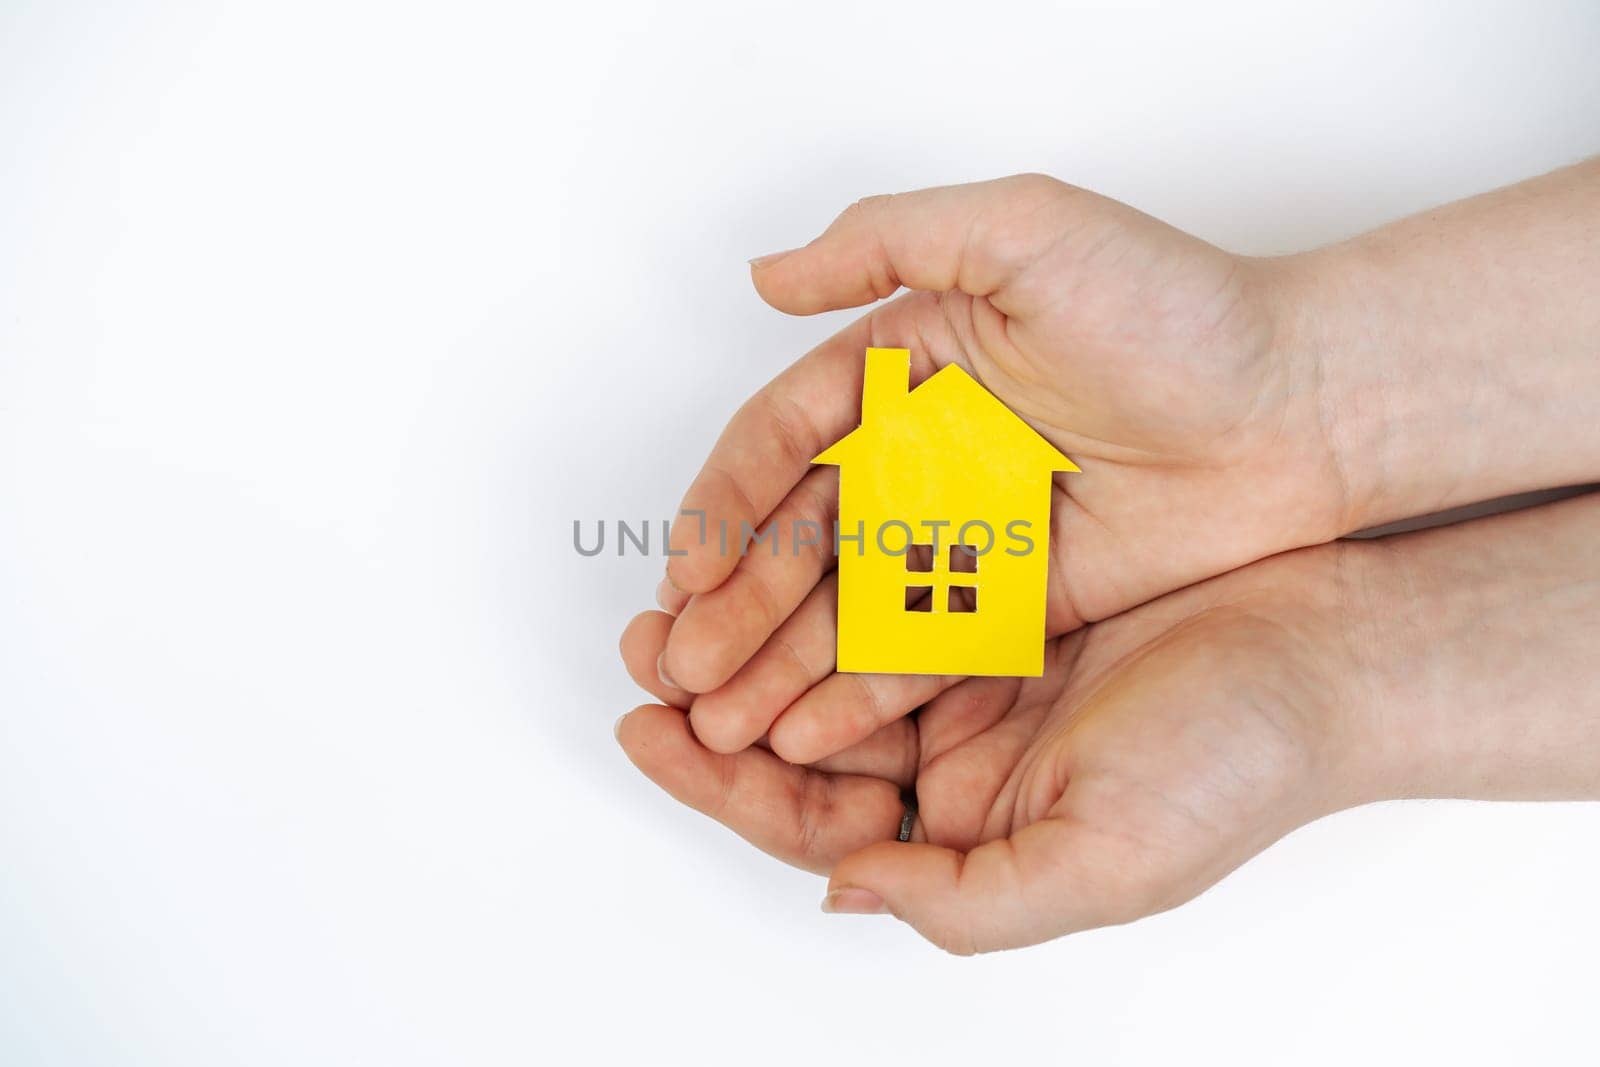 hands holding paper house, family home, homeless housing, mortgage crisis and home protecting insurance concept, foster home care, family day care, social distancing